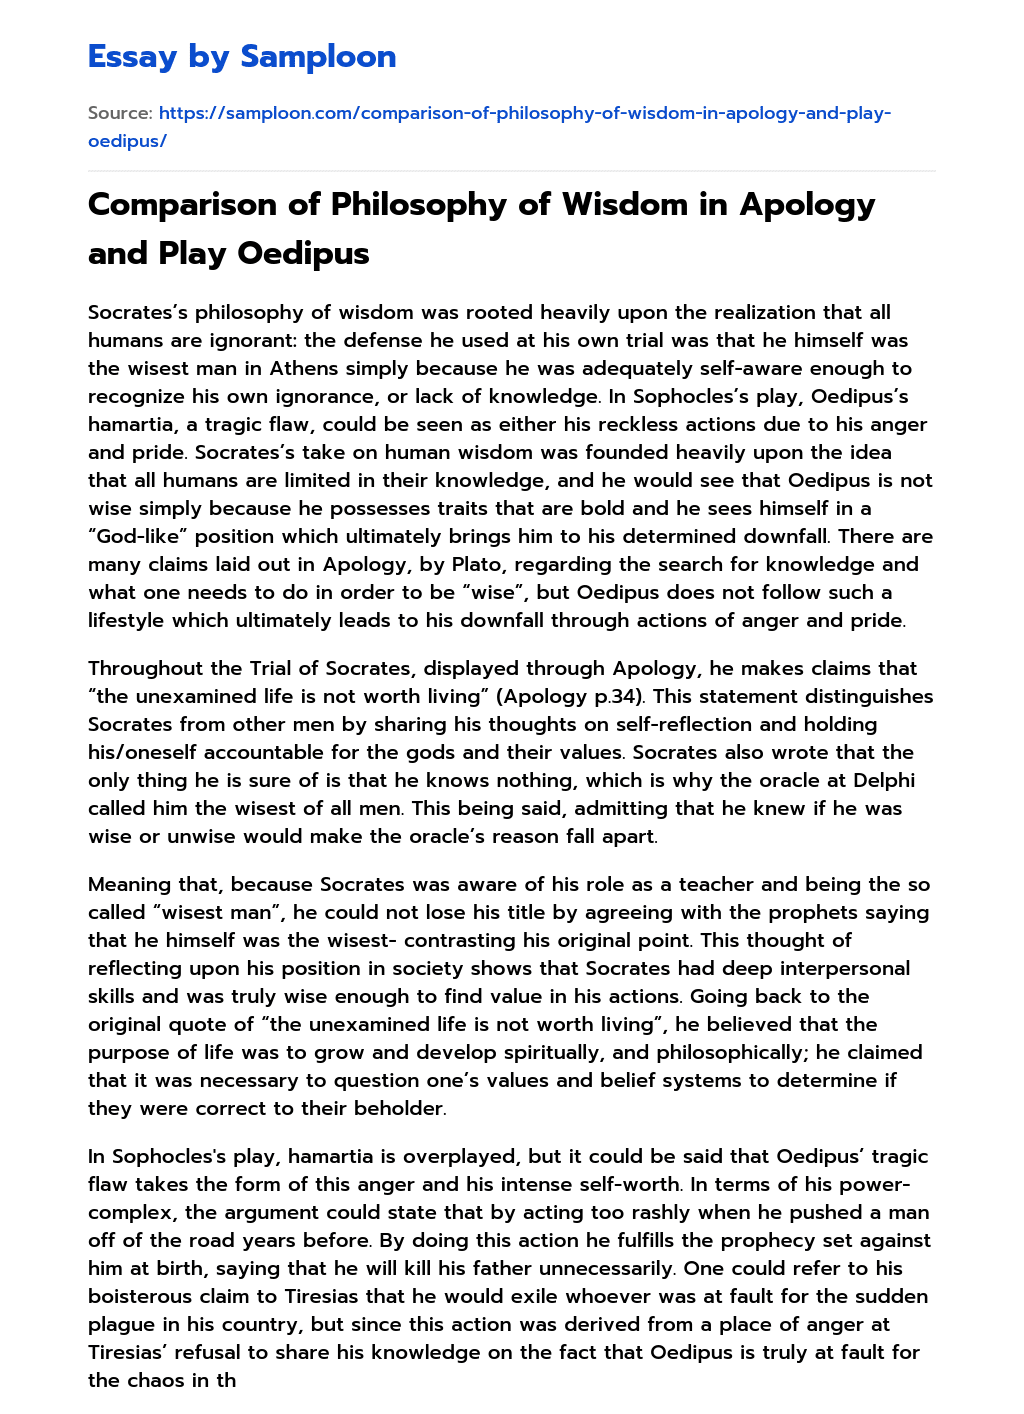 Comparison of Philosophy of Wisdom in Apology and Play Oedipus essay